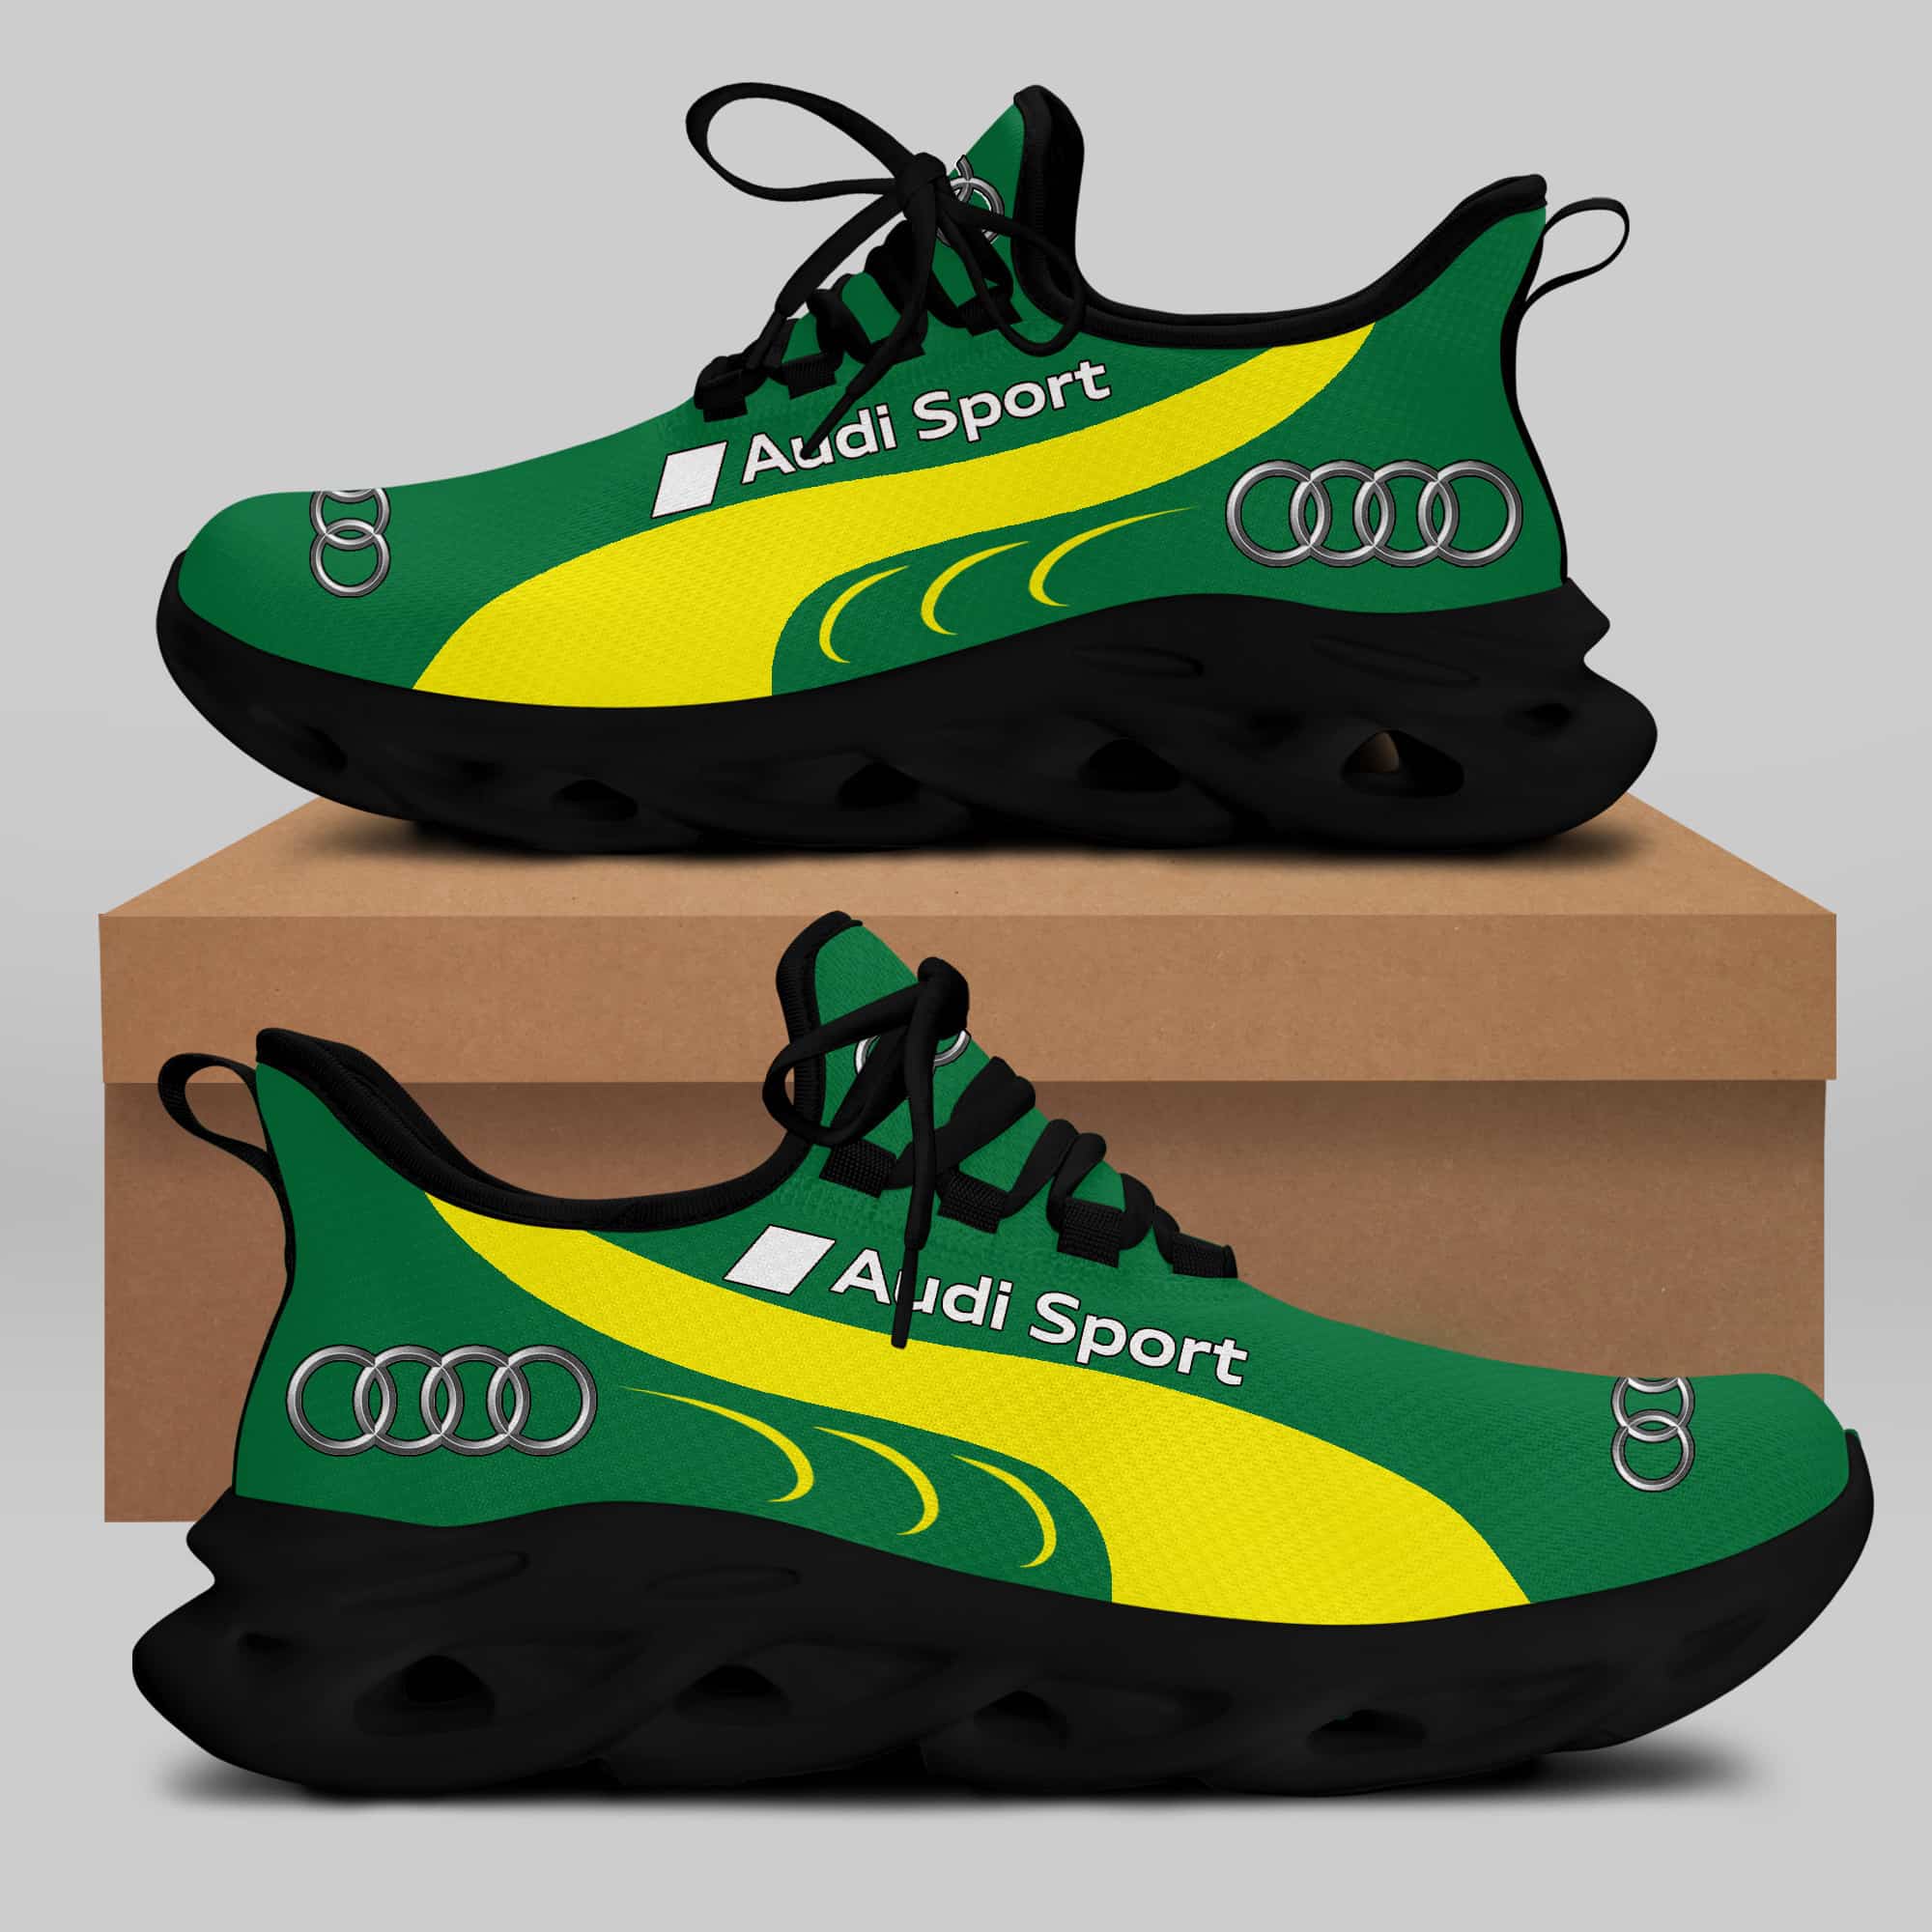 Audi Sport Running Shoes Max Soul Shoes Sneakers Ver 6 1